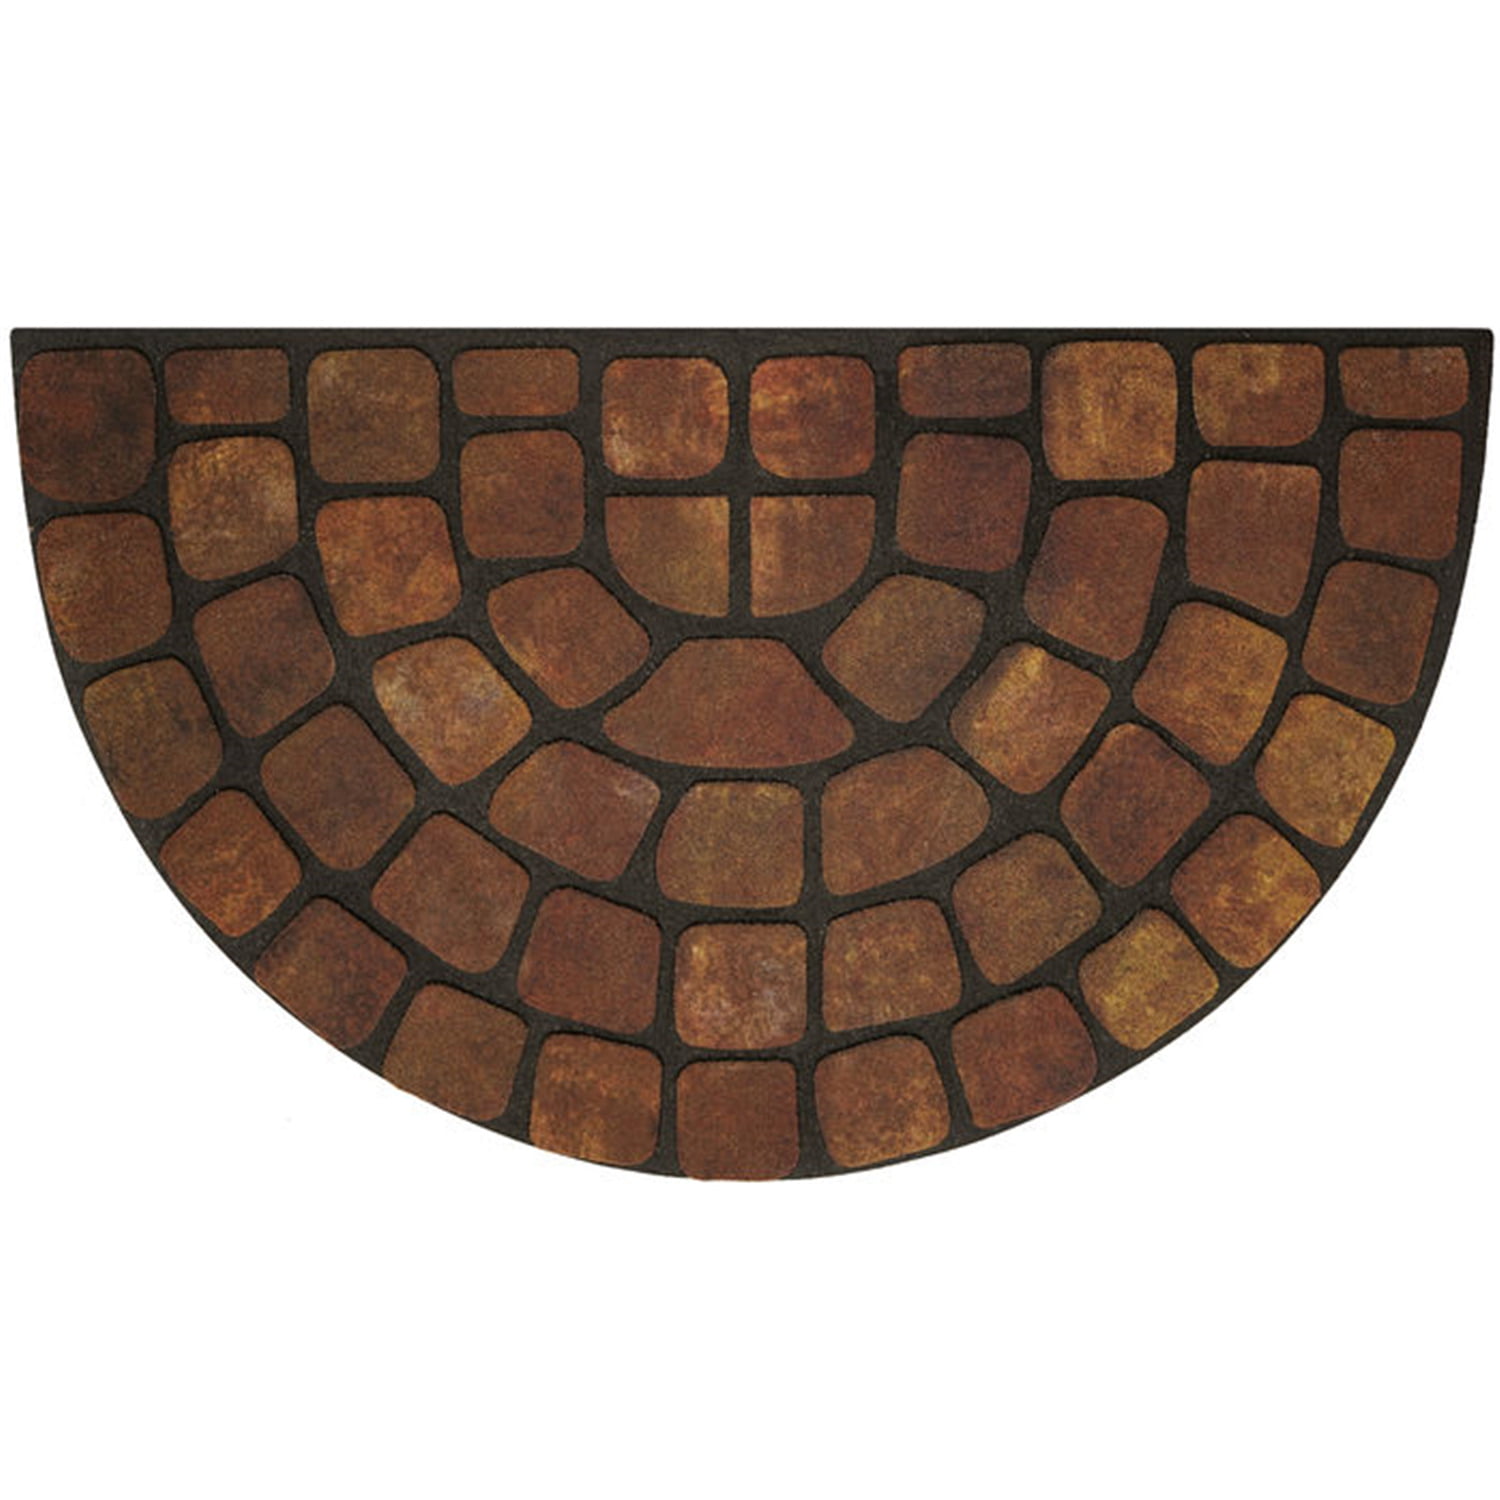 x 30 in. Welcome Quarry Stones Outdoor Rubber Entrance Mat 18 in 